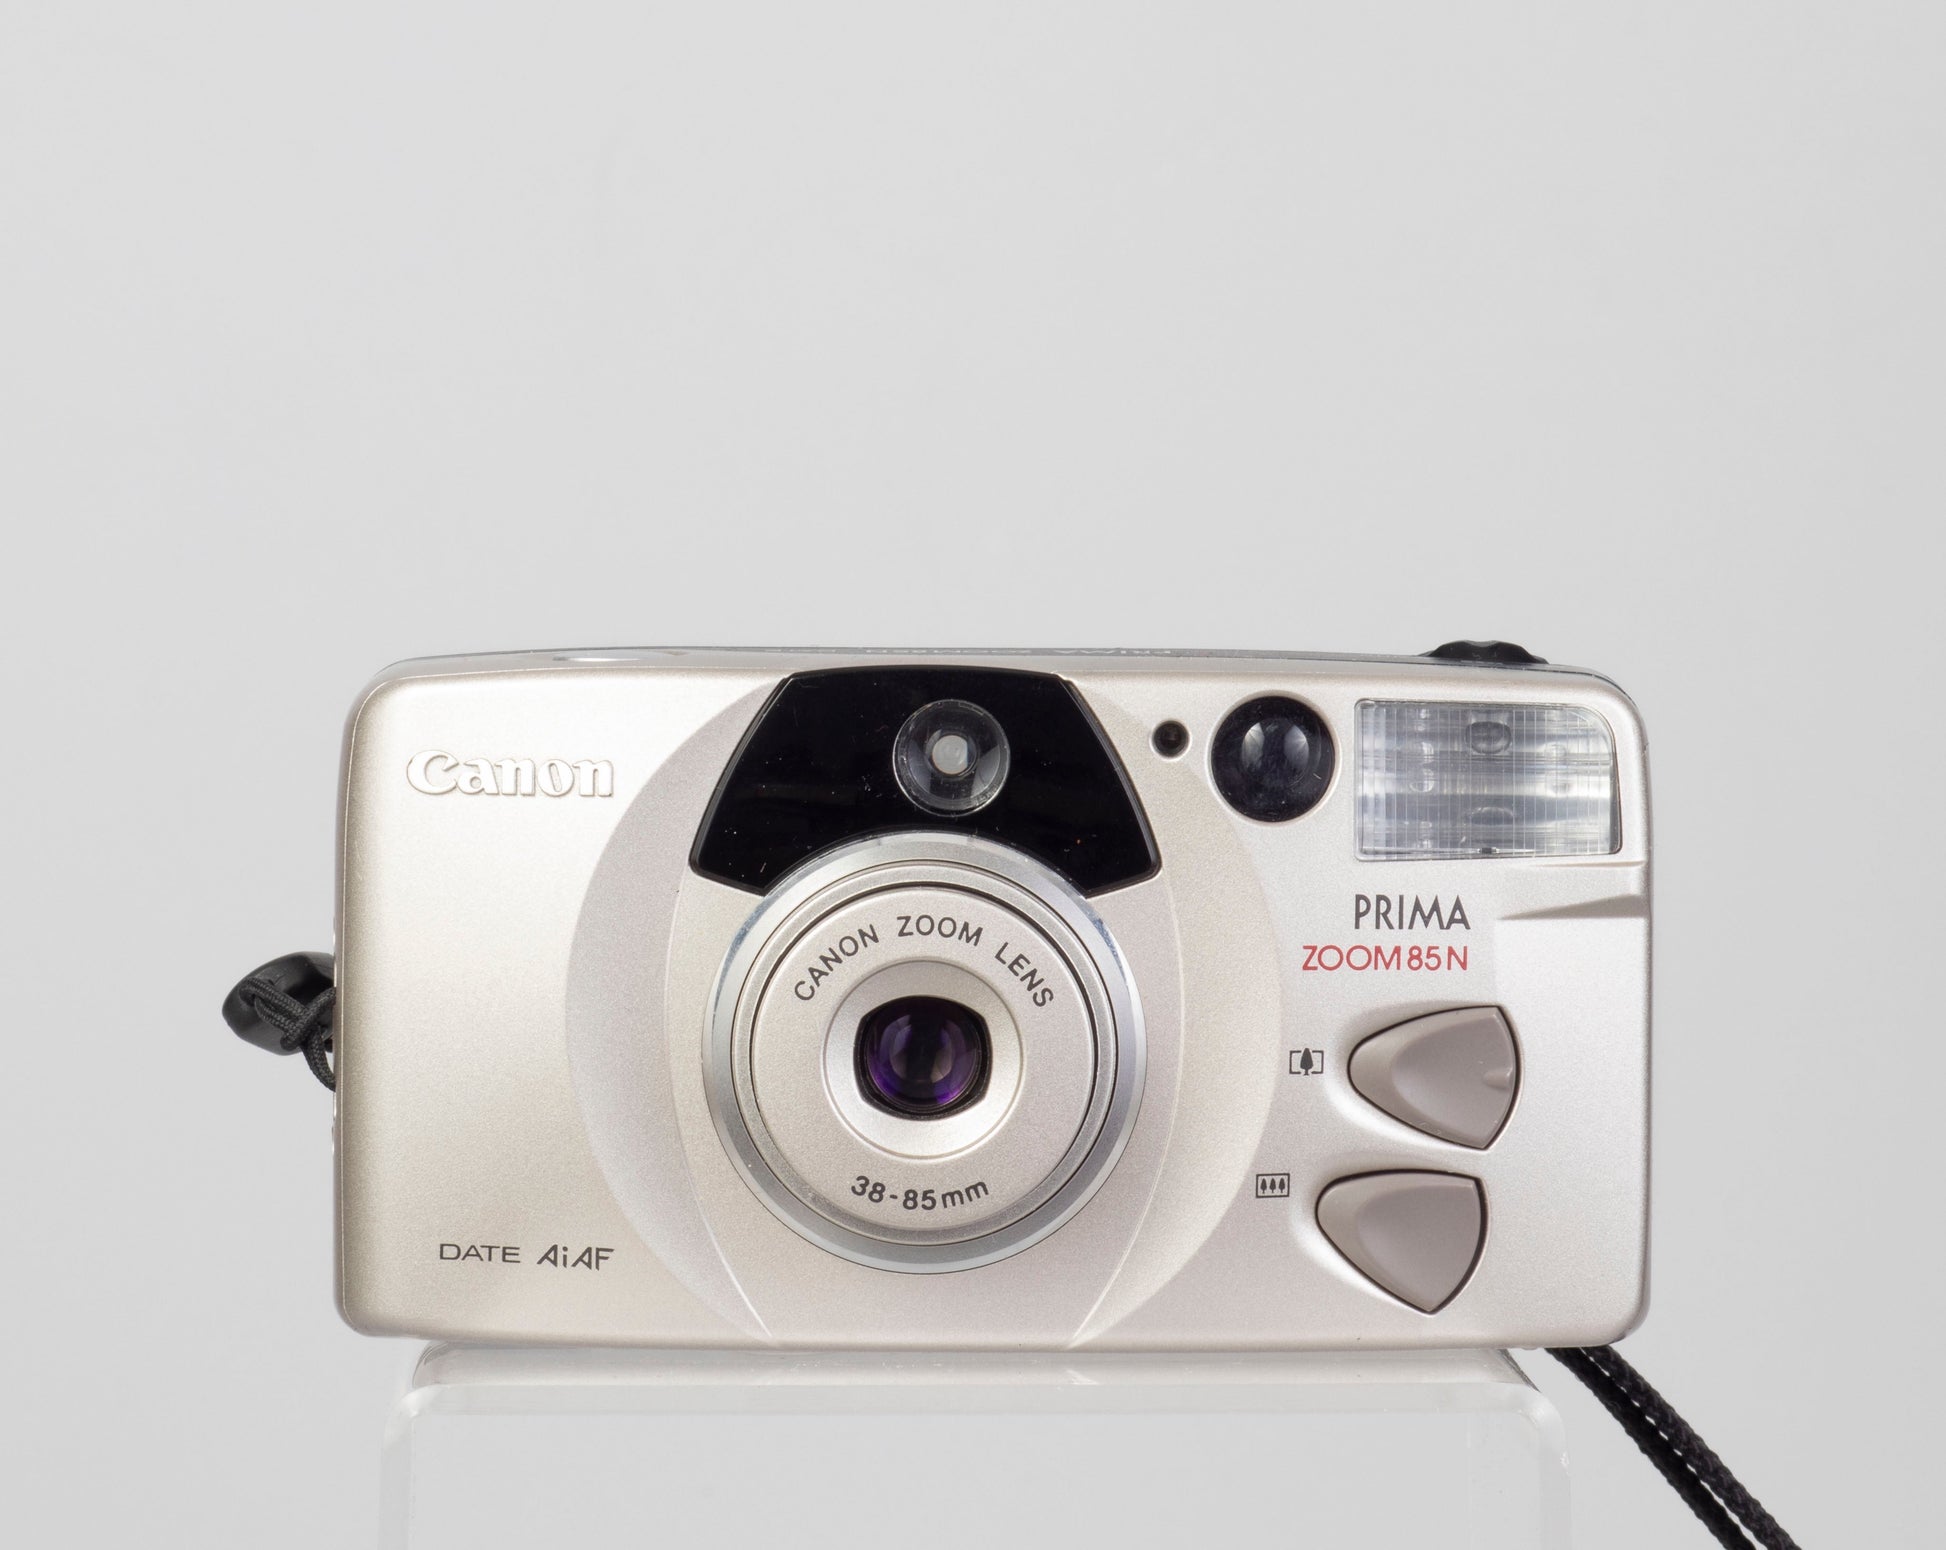 The Canon Prima Zoom 85N is a quality 35mm point-and-shoot from the late 1990s.